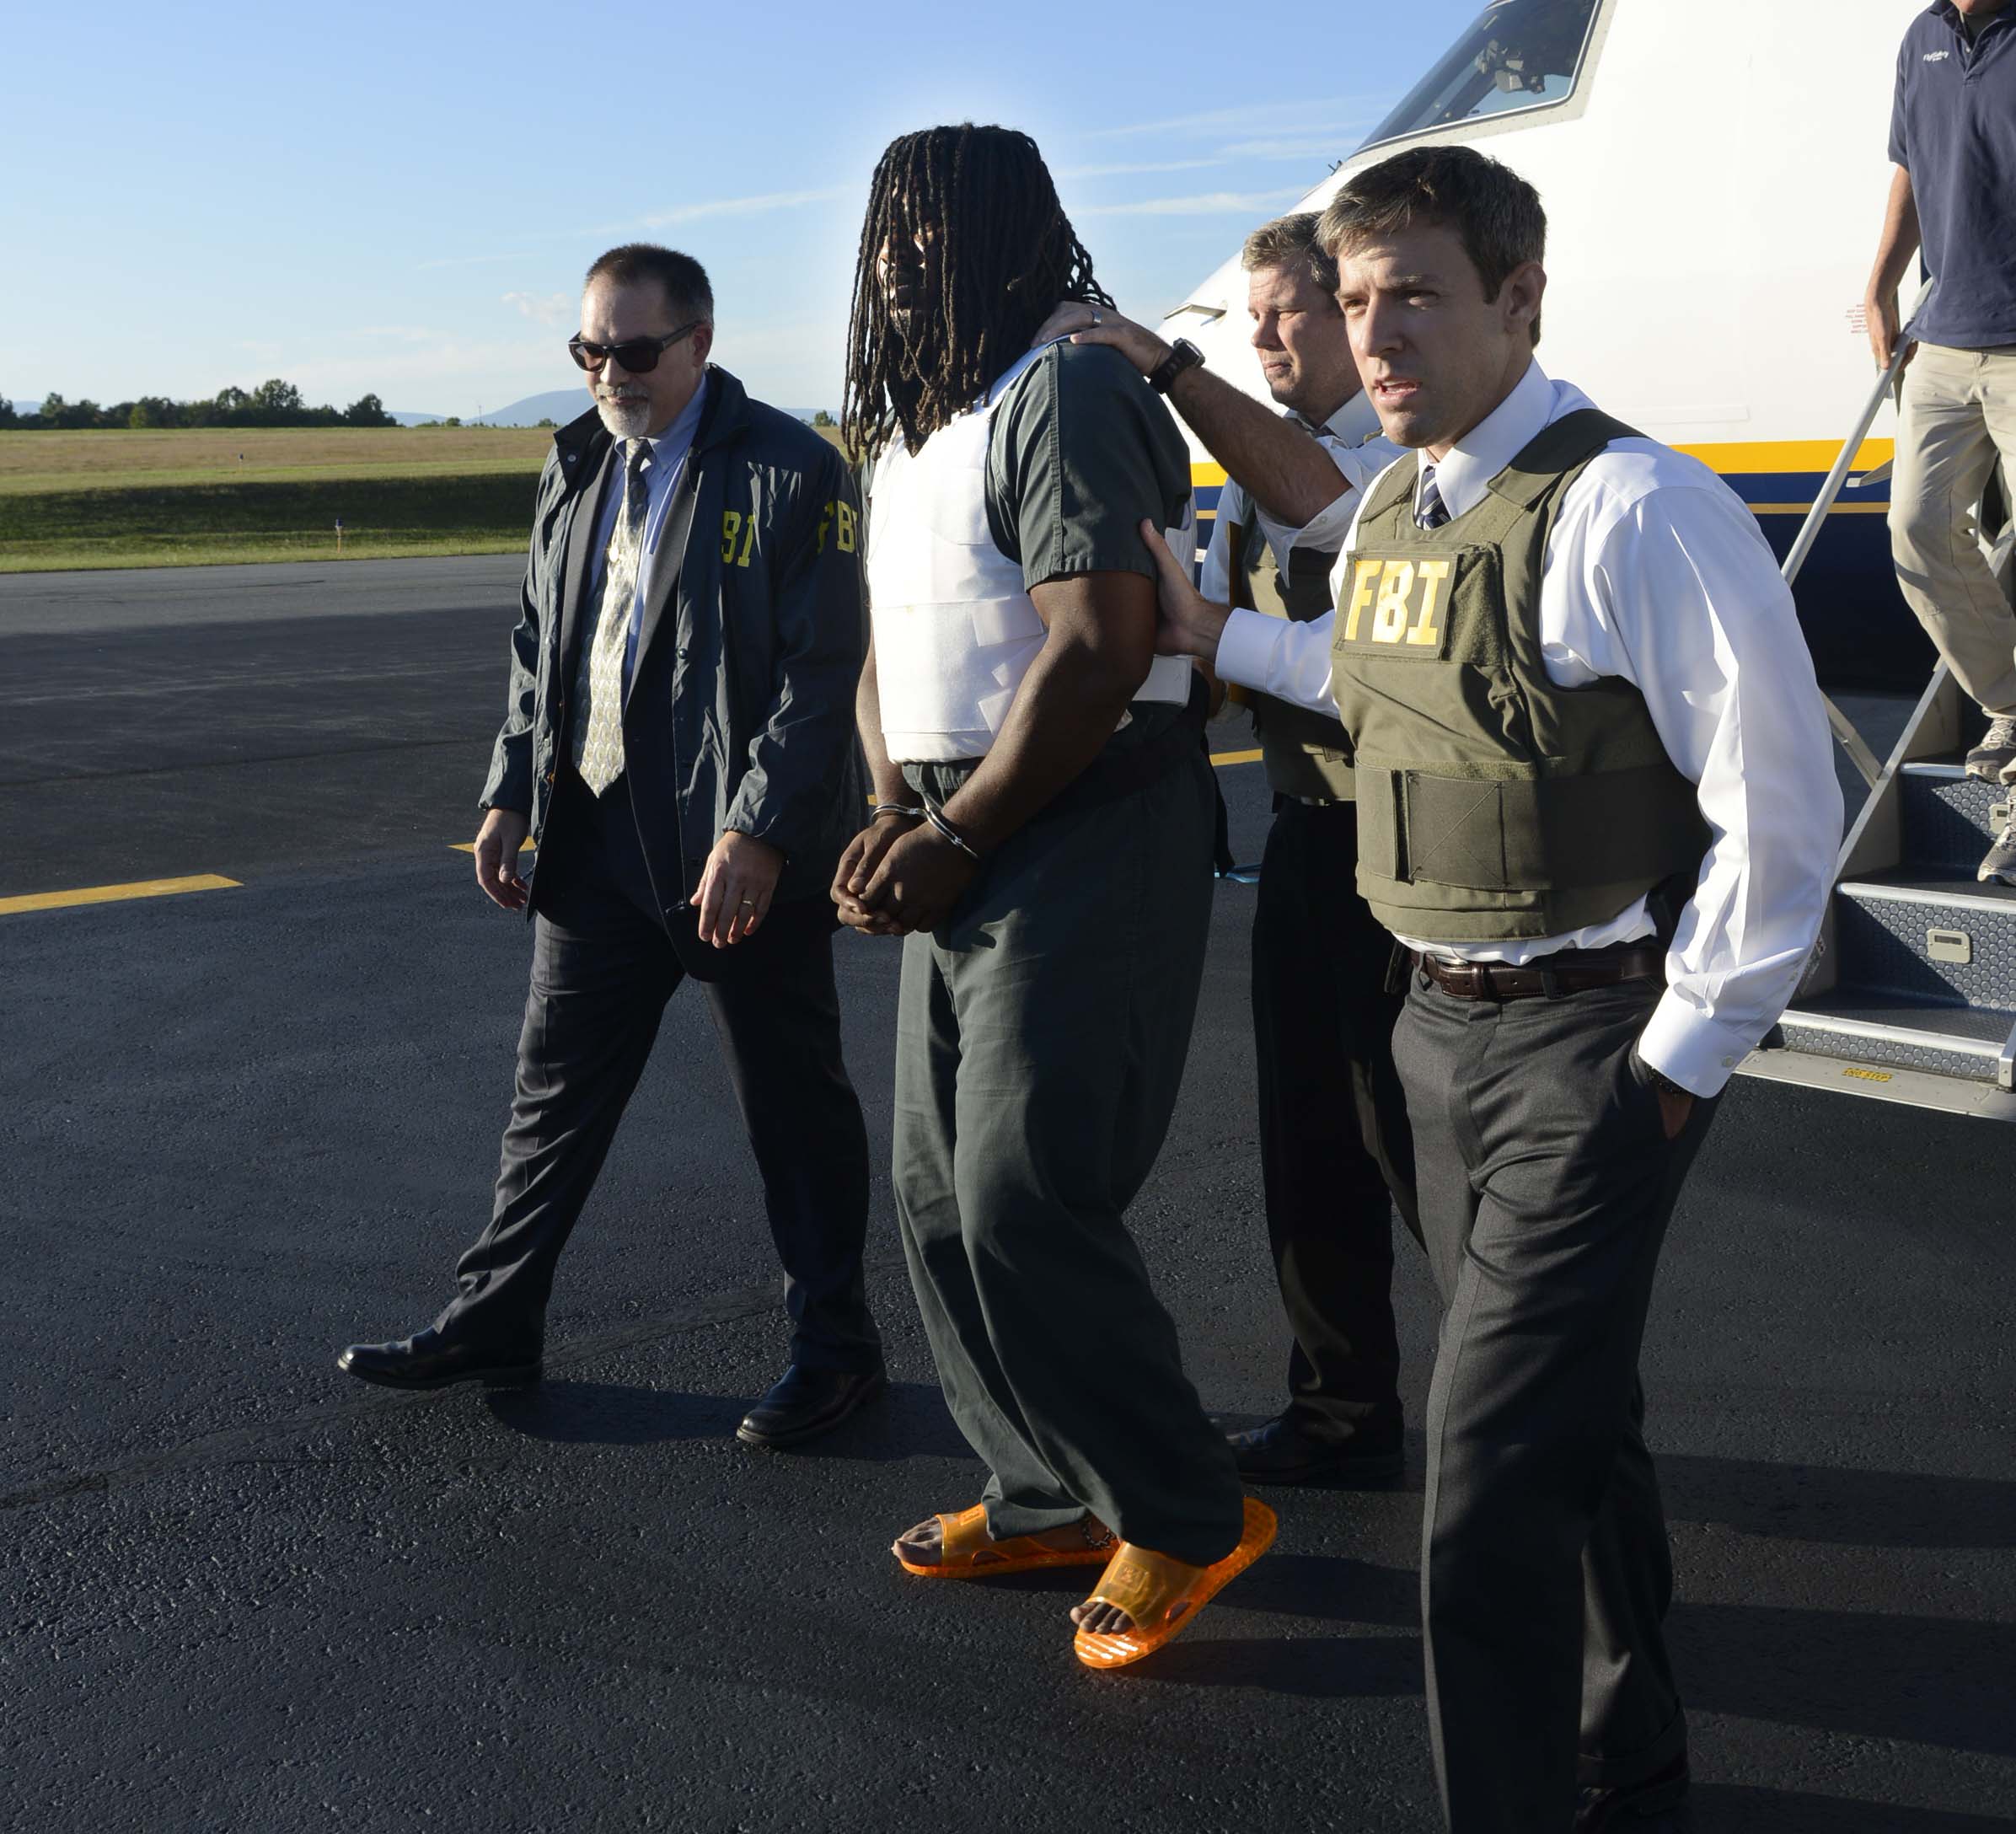 In this Friday, Sept. 26, 2014 photo provided by the FBI, agents escort Jesse Leroy Matthew, Jr., center, from a plane during extradition to Charlottesville, Va.